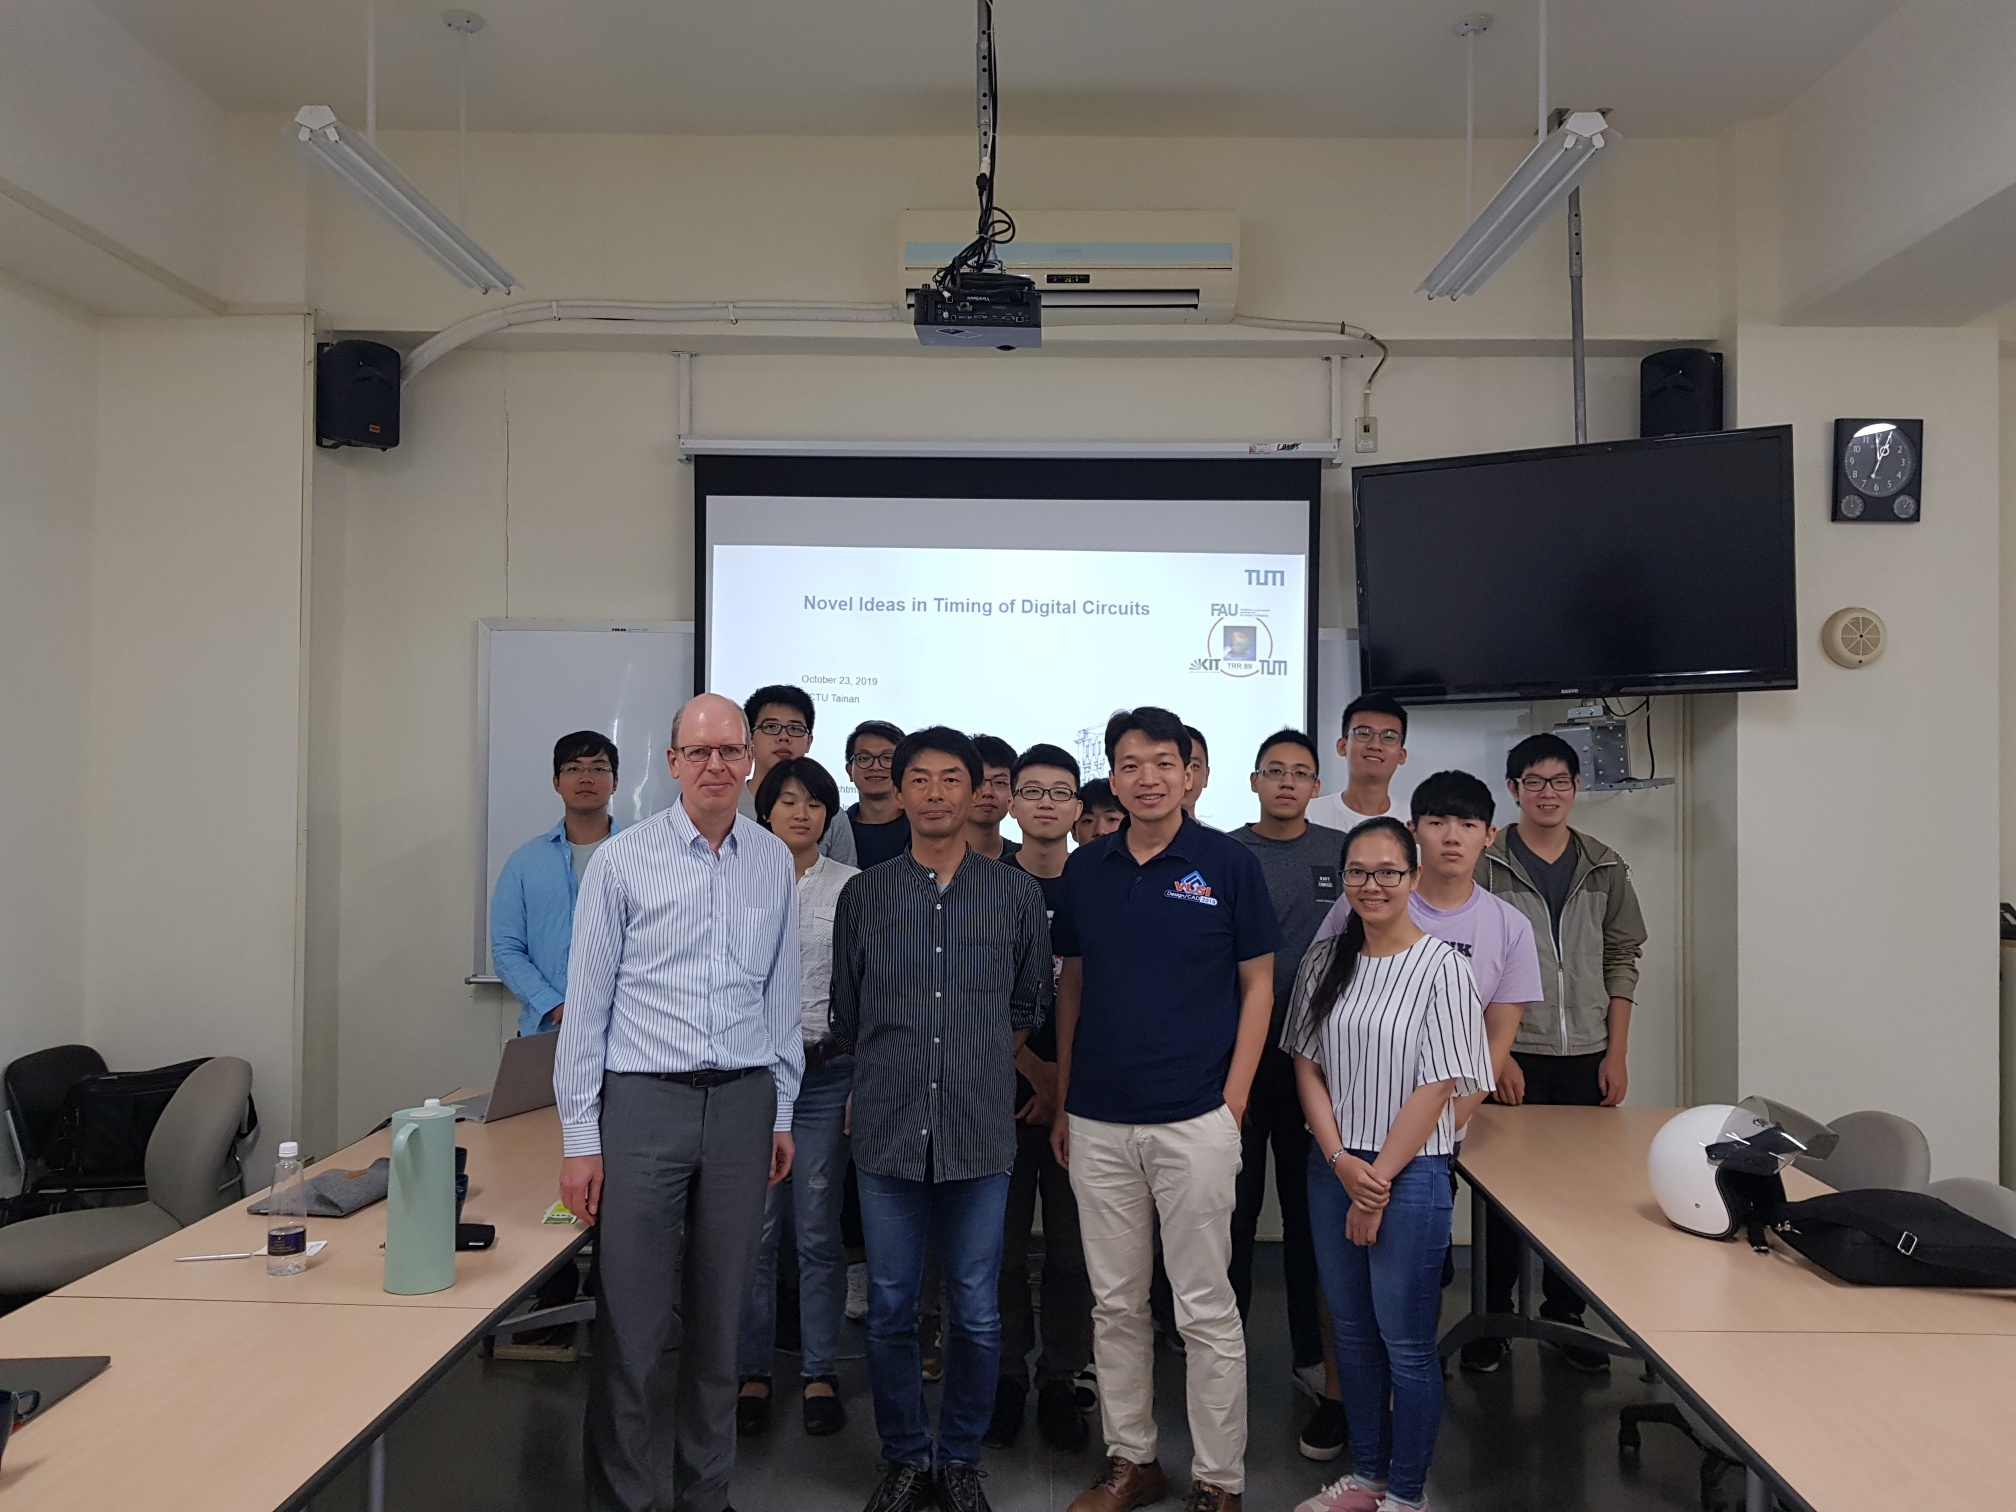 The photo shows Ulf Schlichtmann with his host, Prof. Mark Po-Hung Lin, and his students together with another visitor.></br></p>
					<p style=